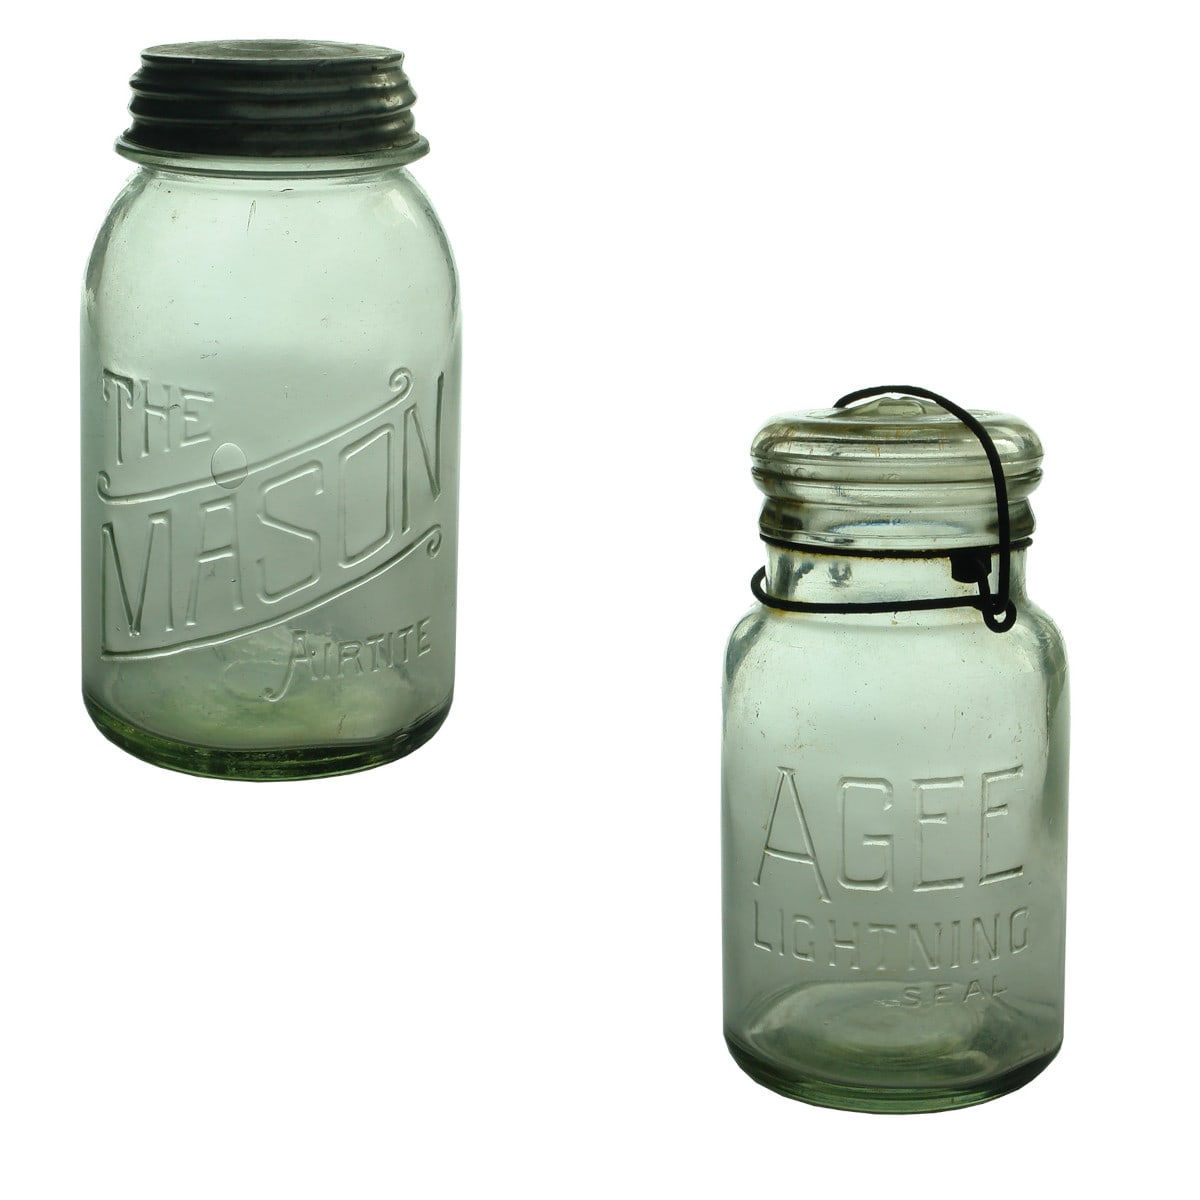 2 Fruit Jars. The Mason Airtite and Agee Lightning Seal.